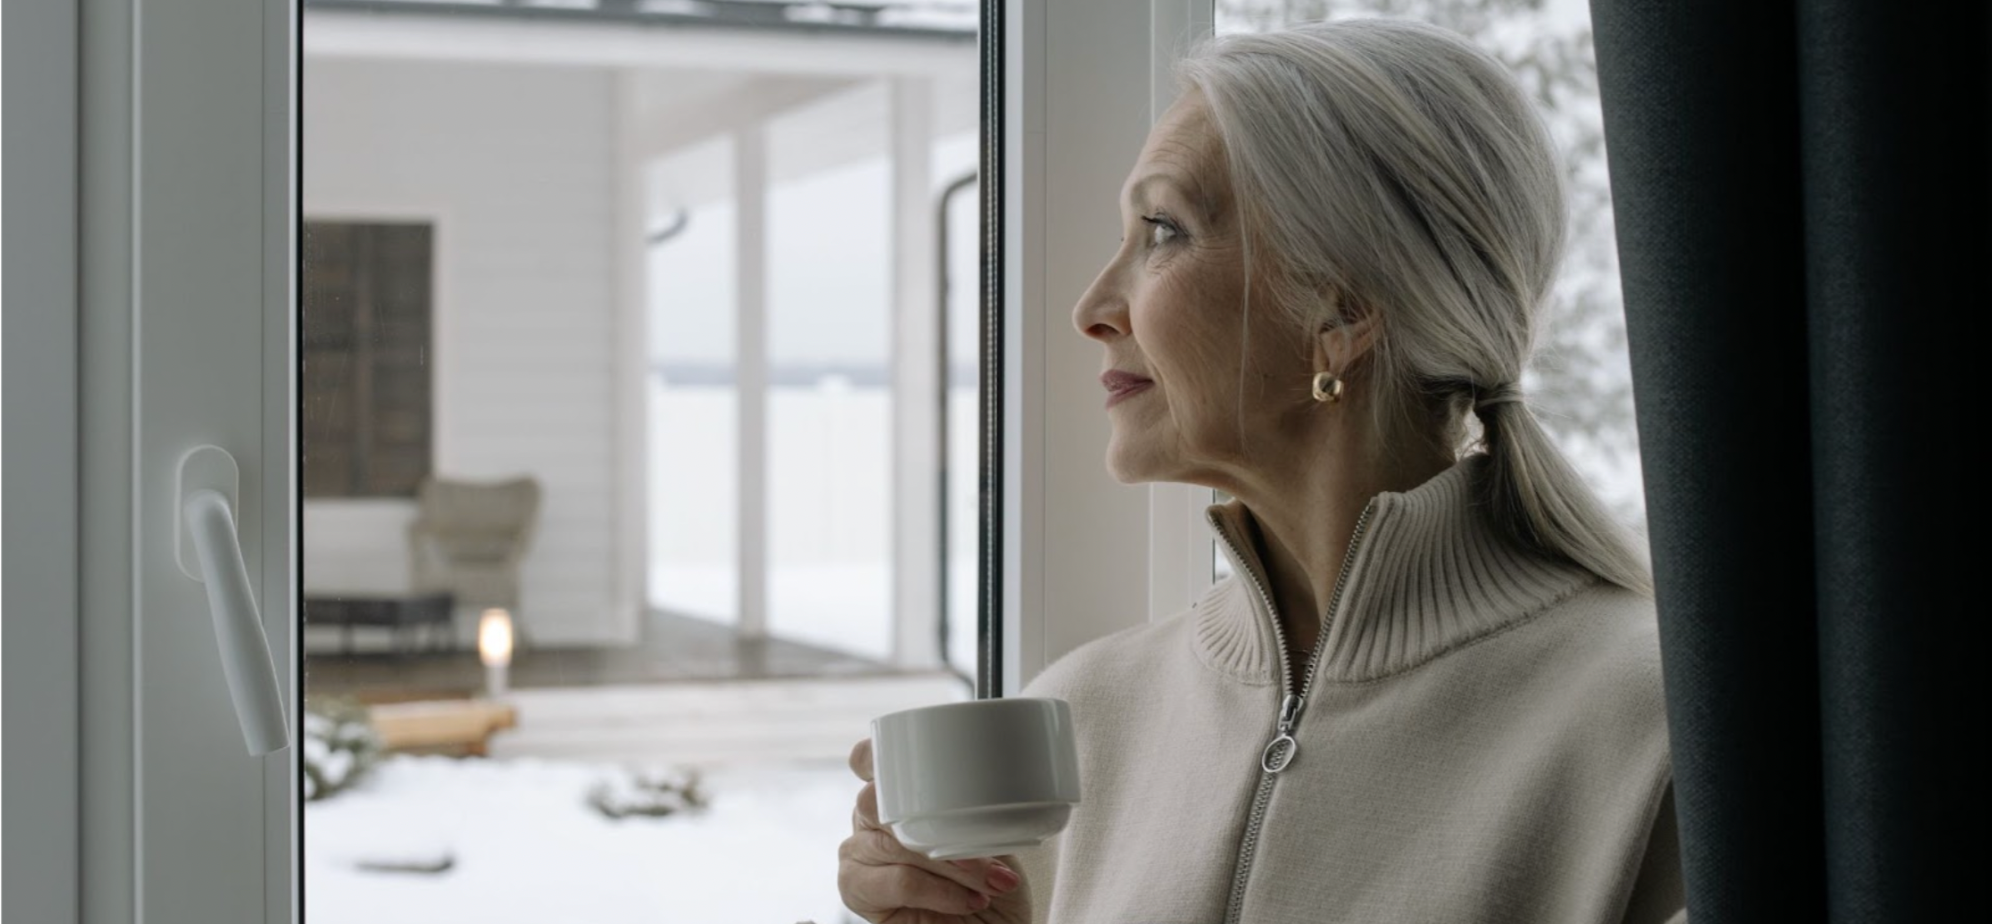 Older woman with grey hair, holding a cup of tea by a window in a sweater